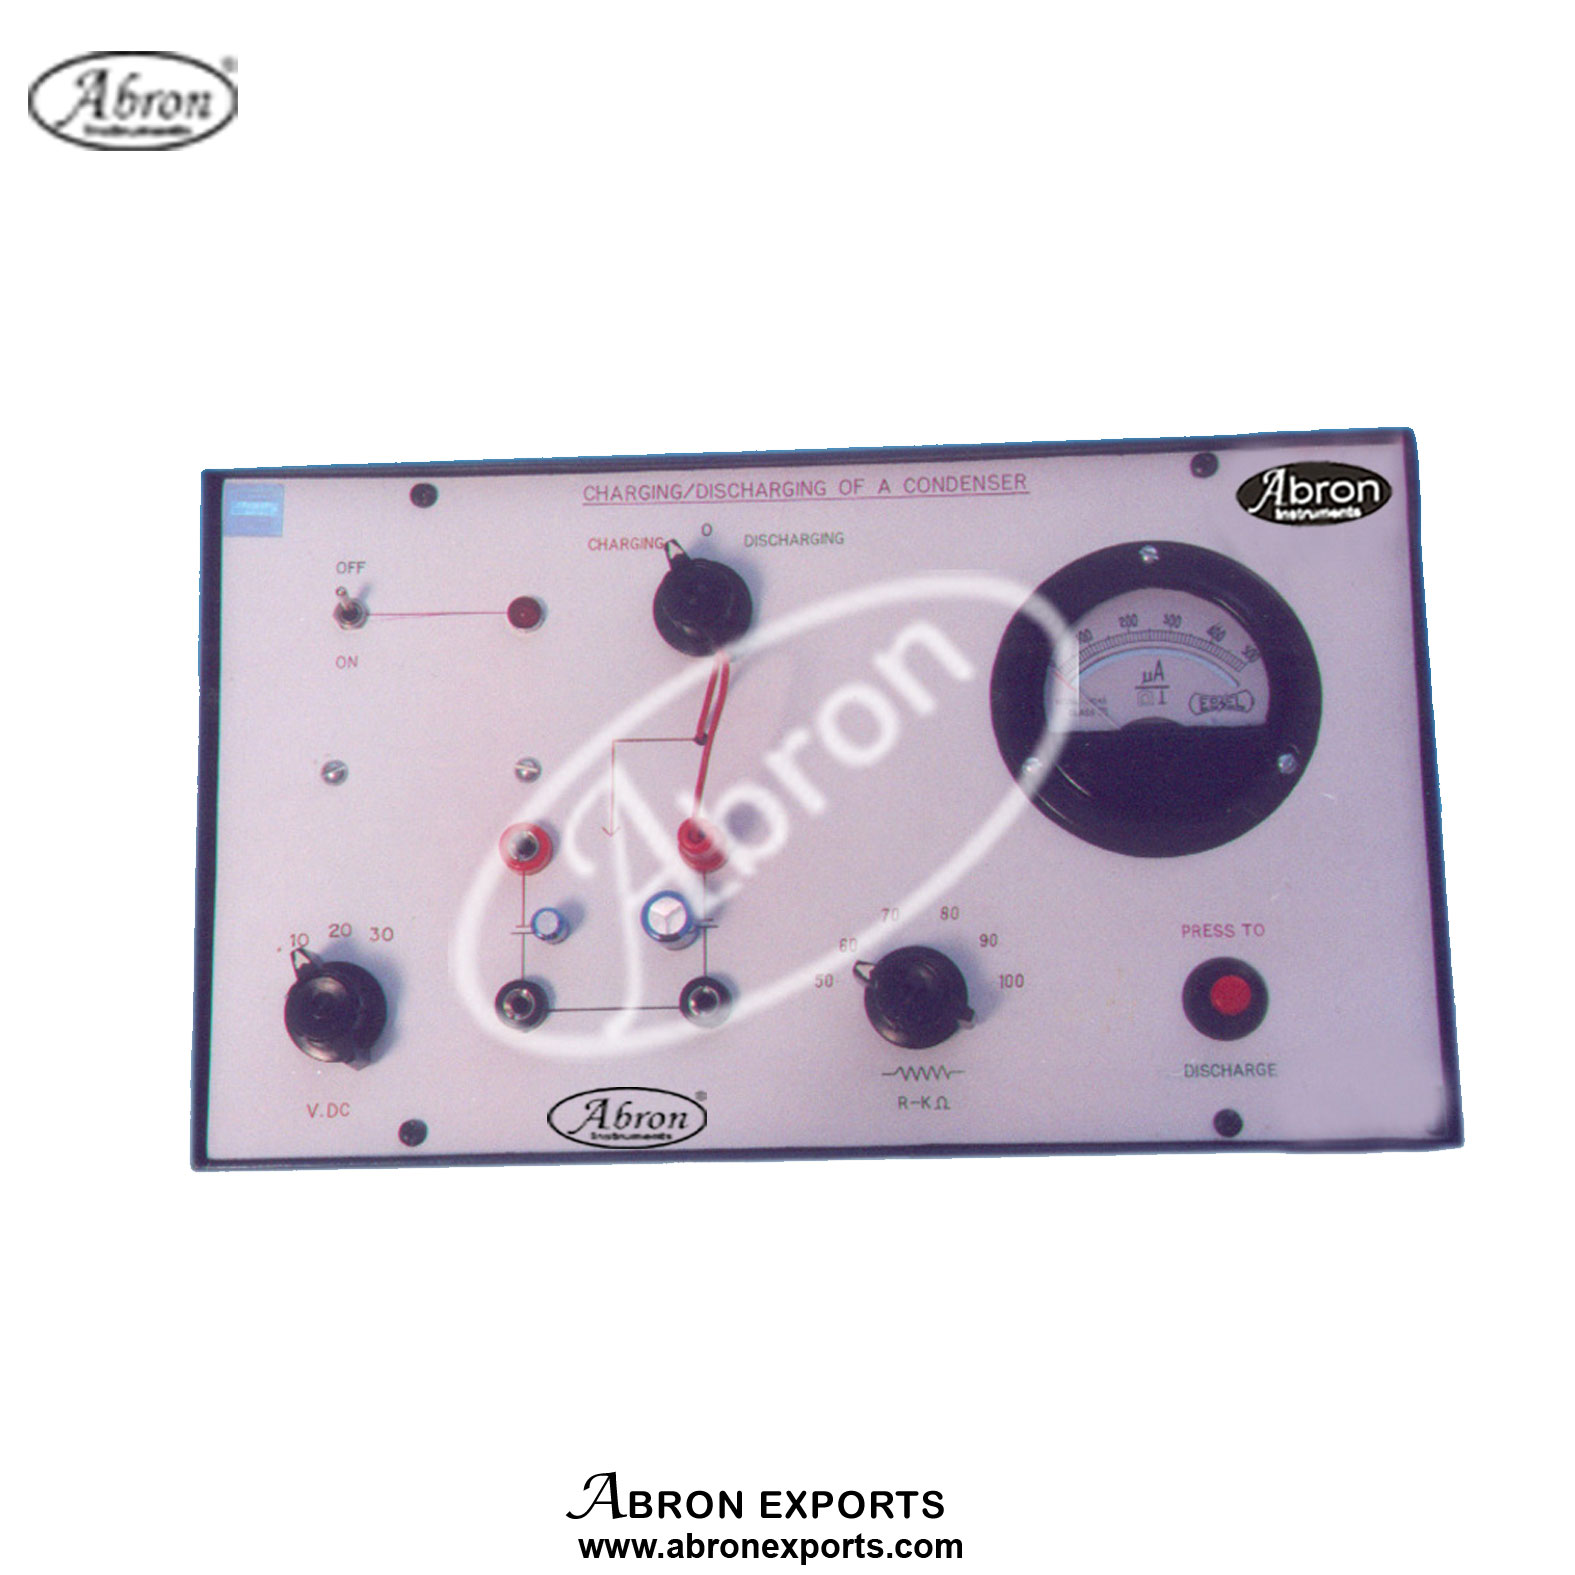 Charging & Discharging Of Capacitor Through Resistance Abron Electronic trainer kit AE-1221A